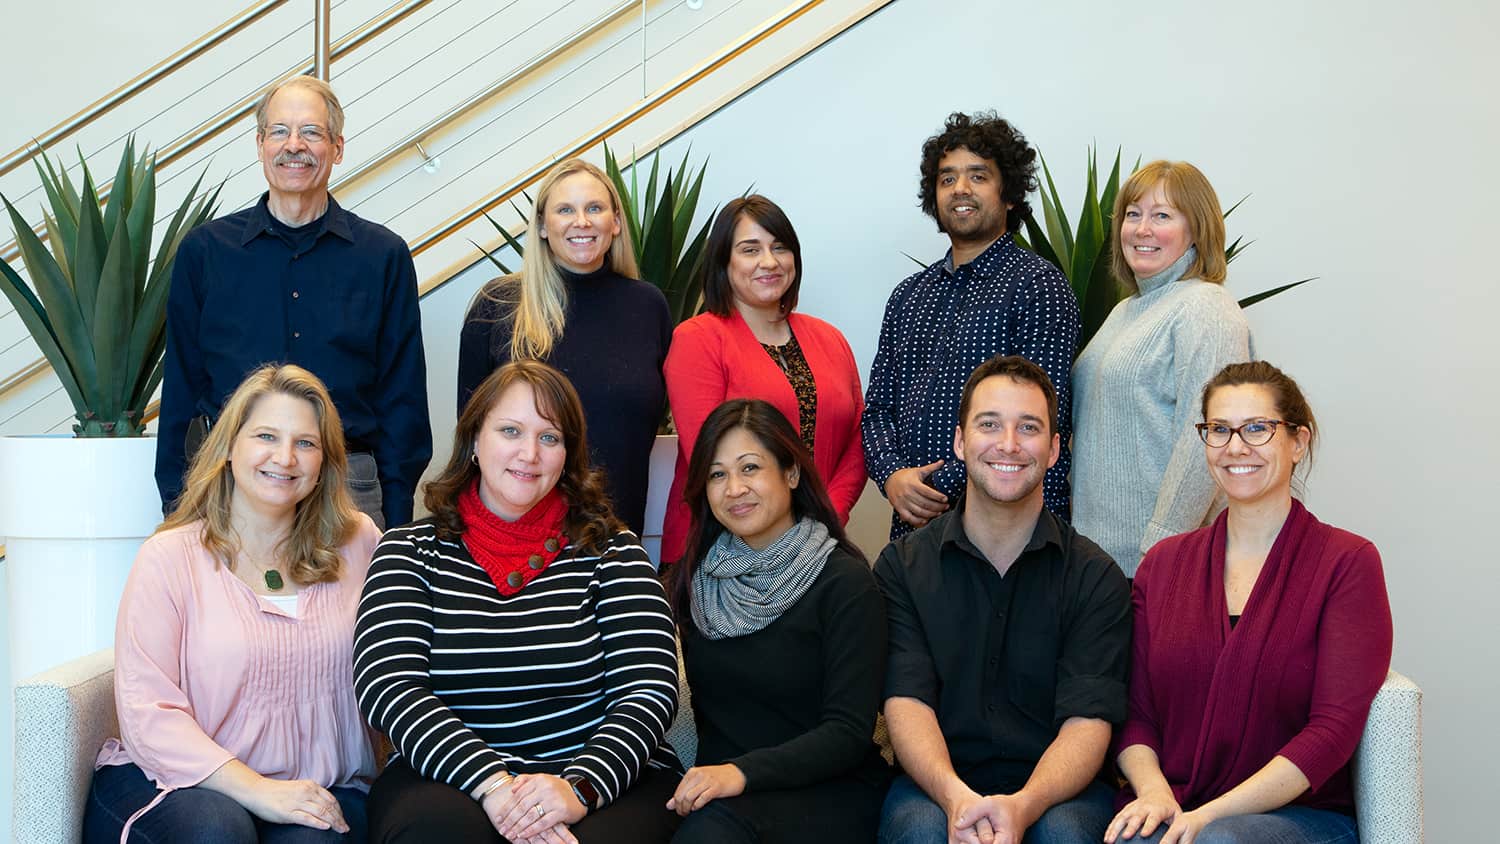 The spring 2019 OCIP team. Front row, left to right: Rebecca Sanchez, Bethany Smith, Arlene Mendoza-Moran, Christopher Beeson and Bethanne Tobey. Back row, left to right: Peter Hessling, Julianne Treme, Melissa Ramirez, Muntazar Monsur and Christine Cranford.